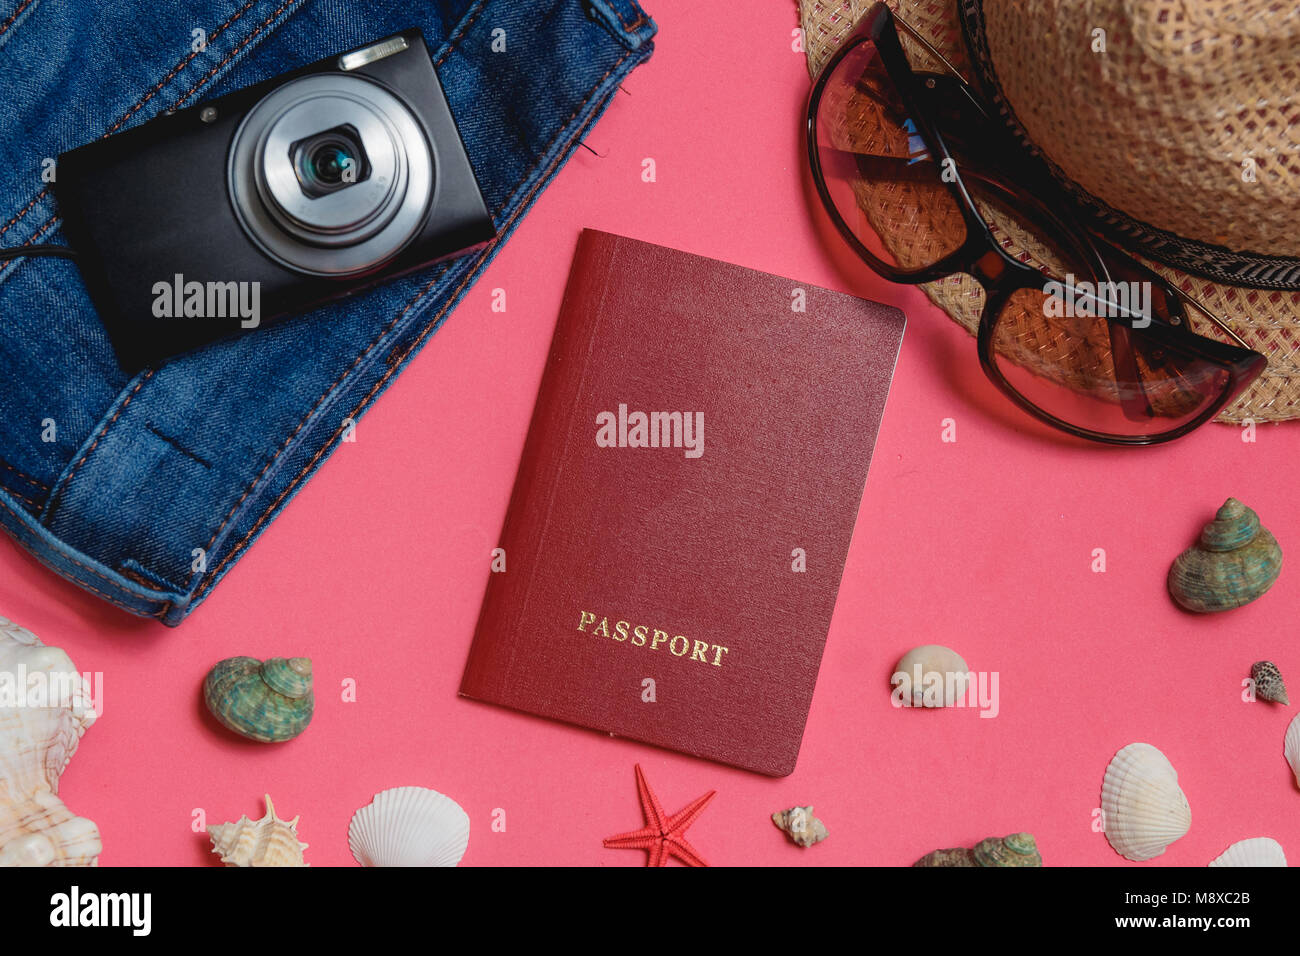 Passport, Seashells, Clothes, Sunglasses, Photo Camera, Brown Hat, on Pink Background Top View Travel Concept Stock Photo